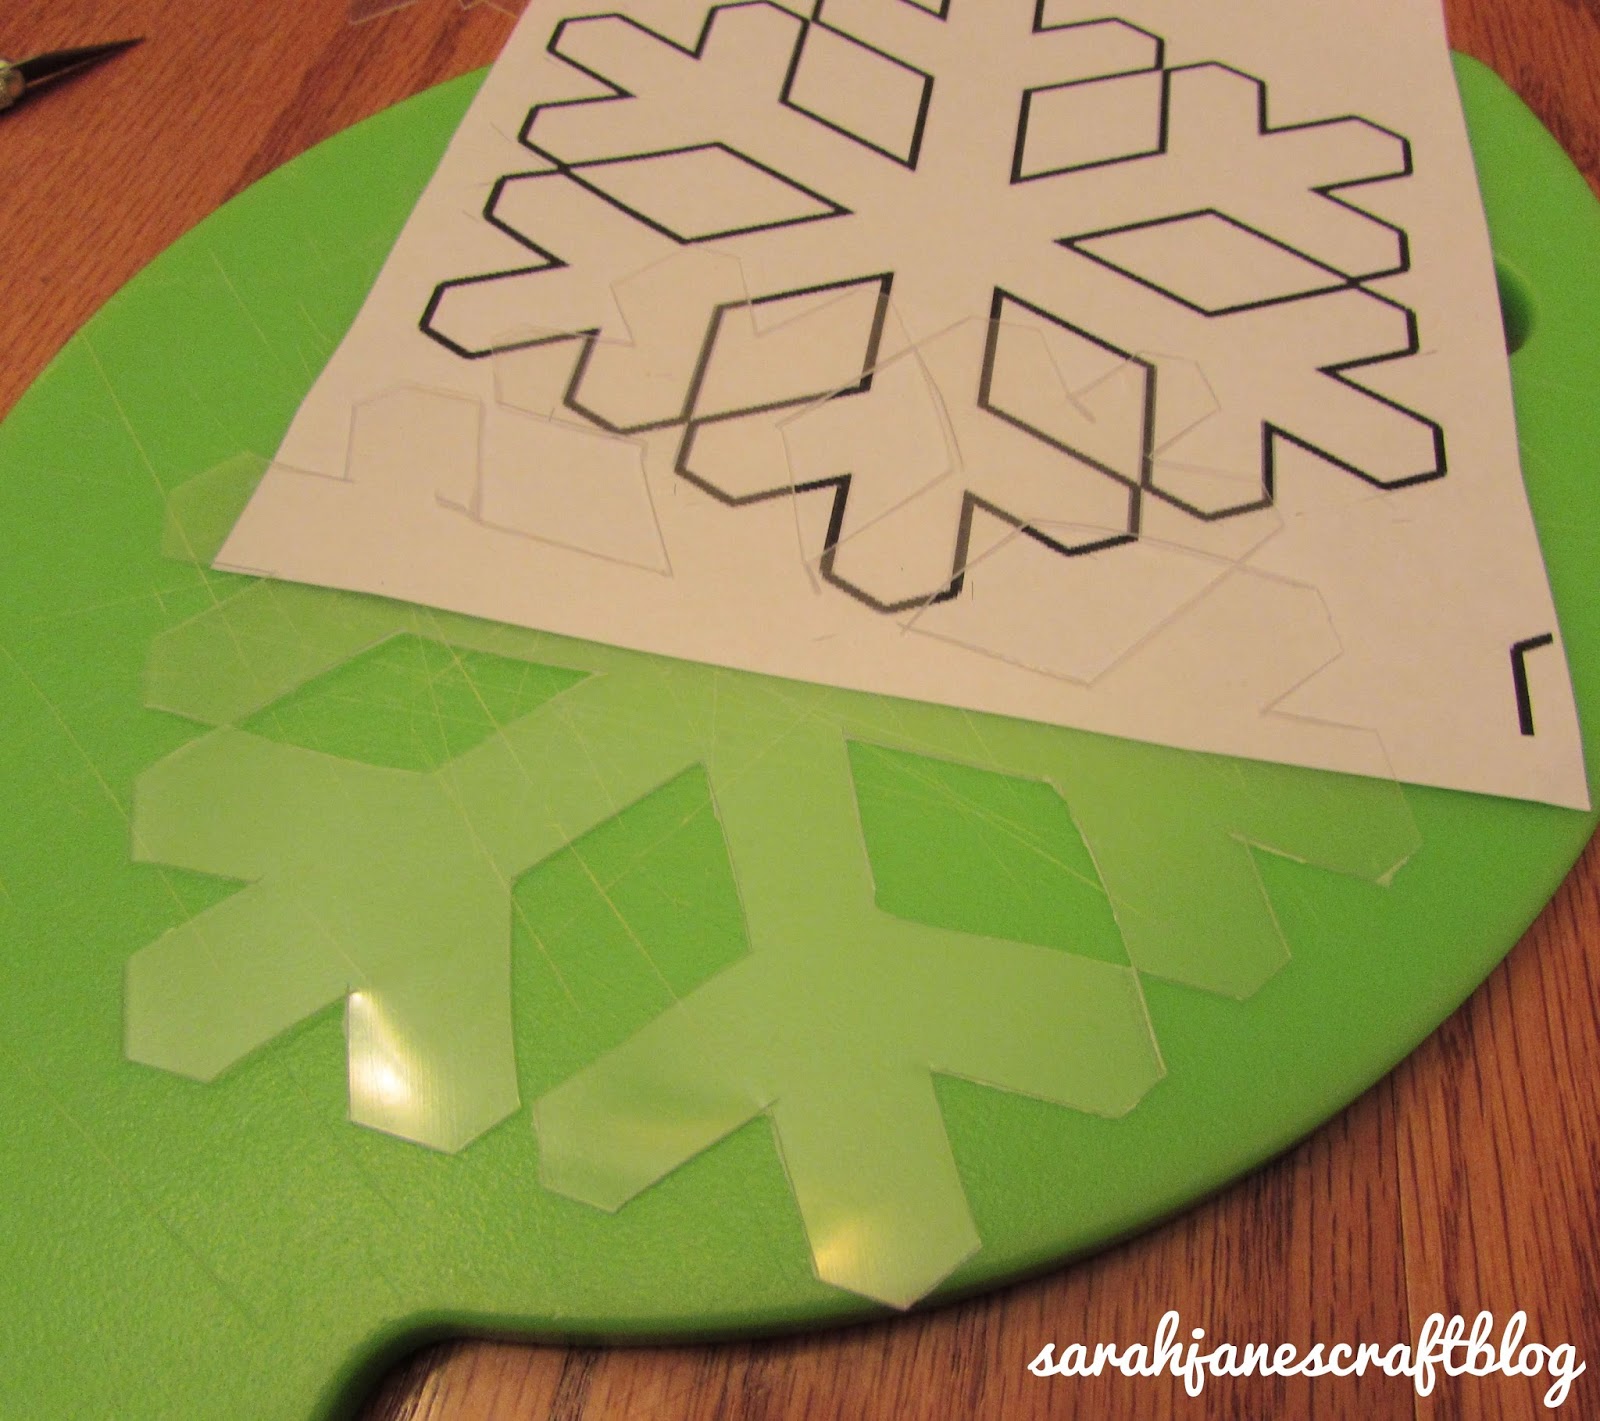 Shrink Plastic Snowflakes - Things to Make and Do, Crafts and